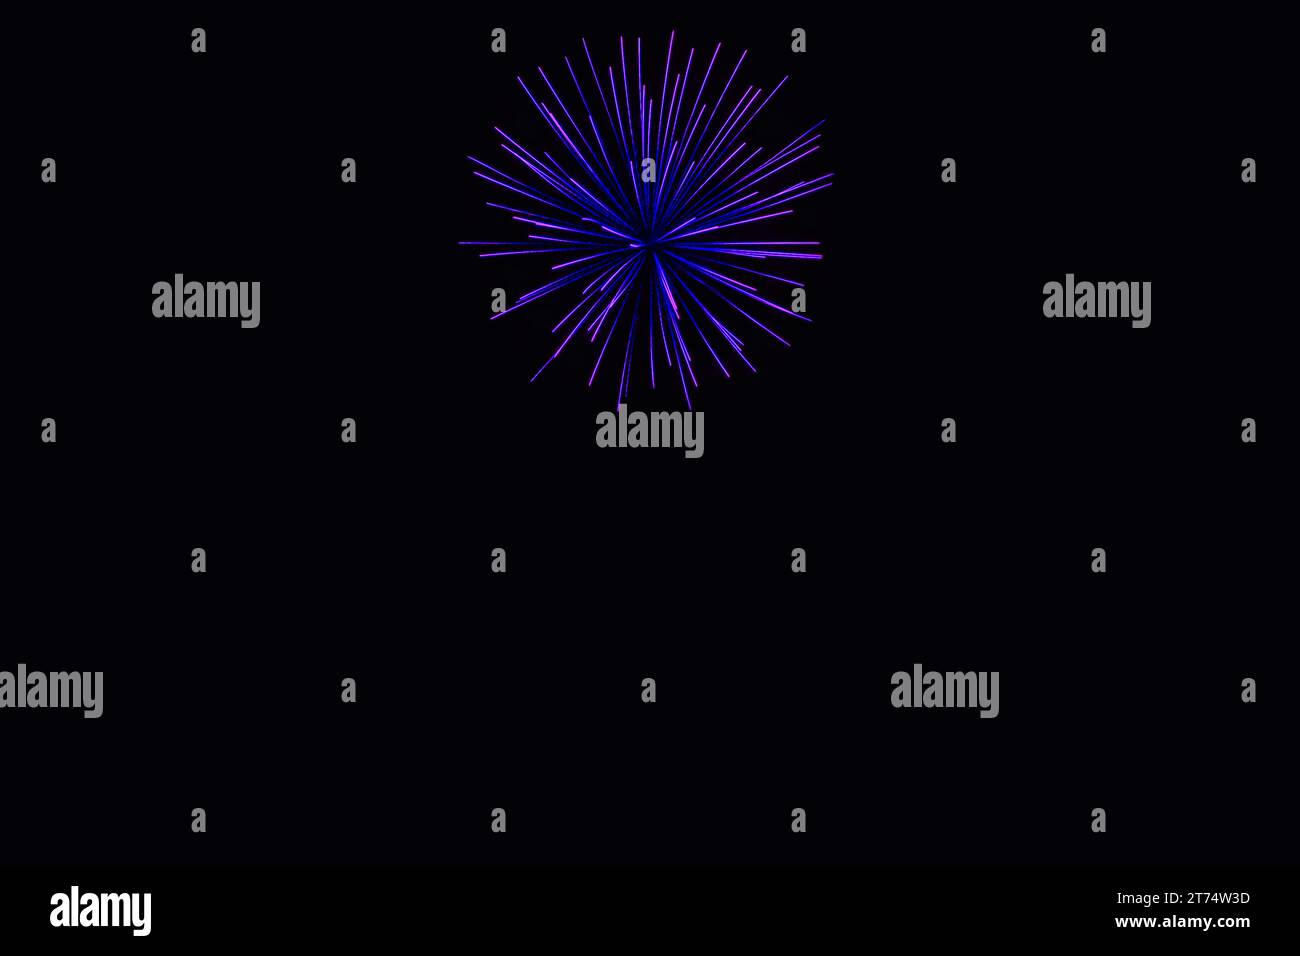 New Year's Night, Diwali, bonfire night Starbursts and Rocket Explosions on Black Background Sky with Red, Green, Blue, Purple, Gold Colour fireworks Stock Photo